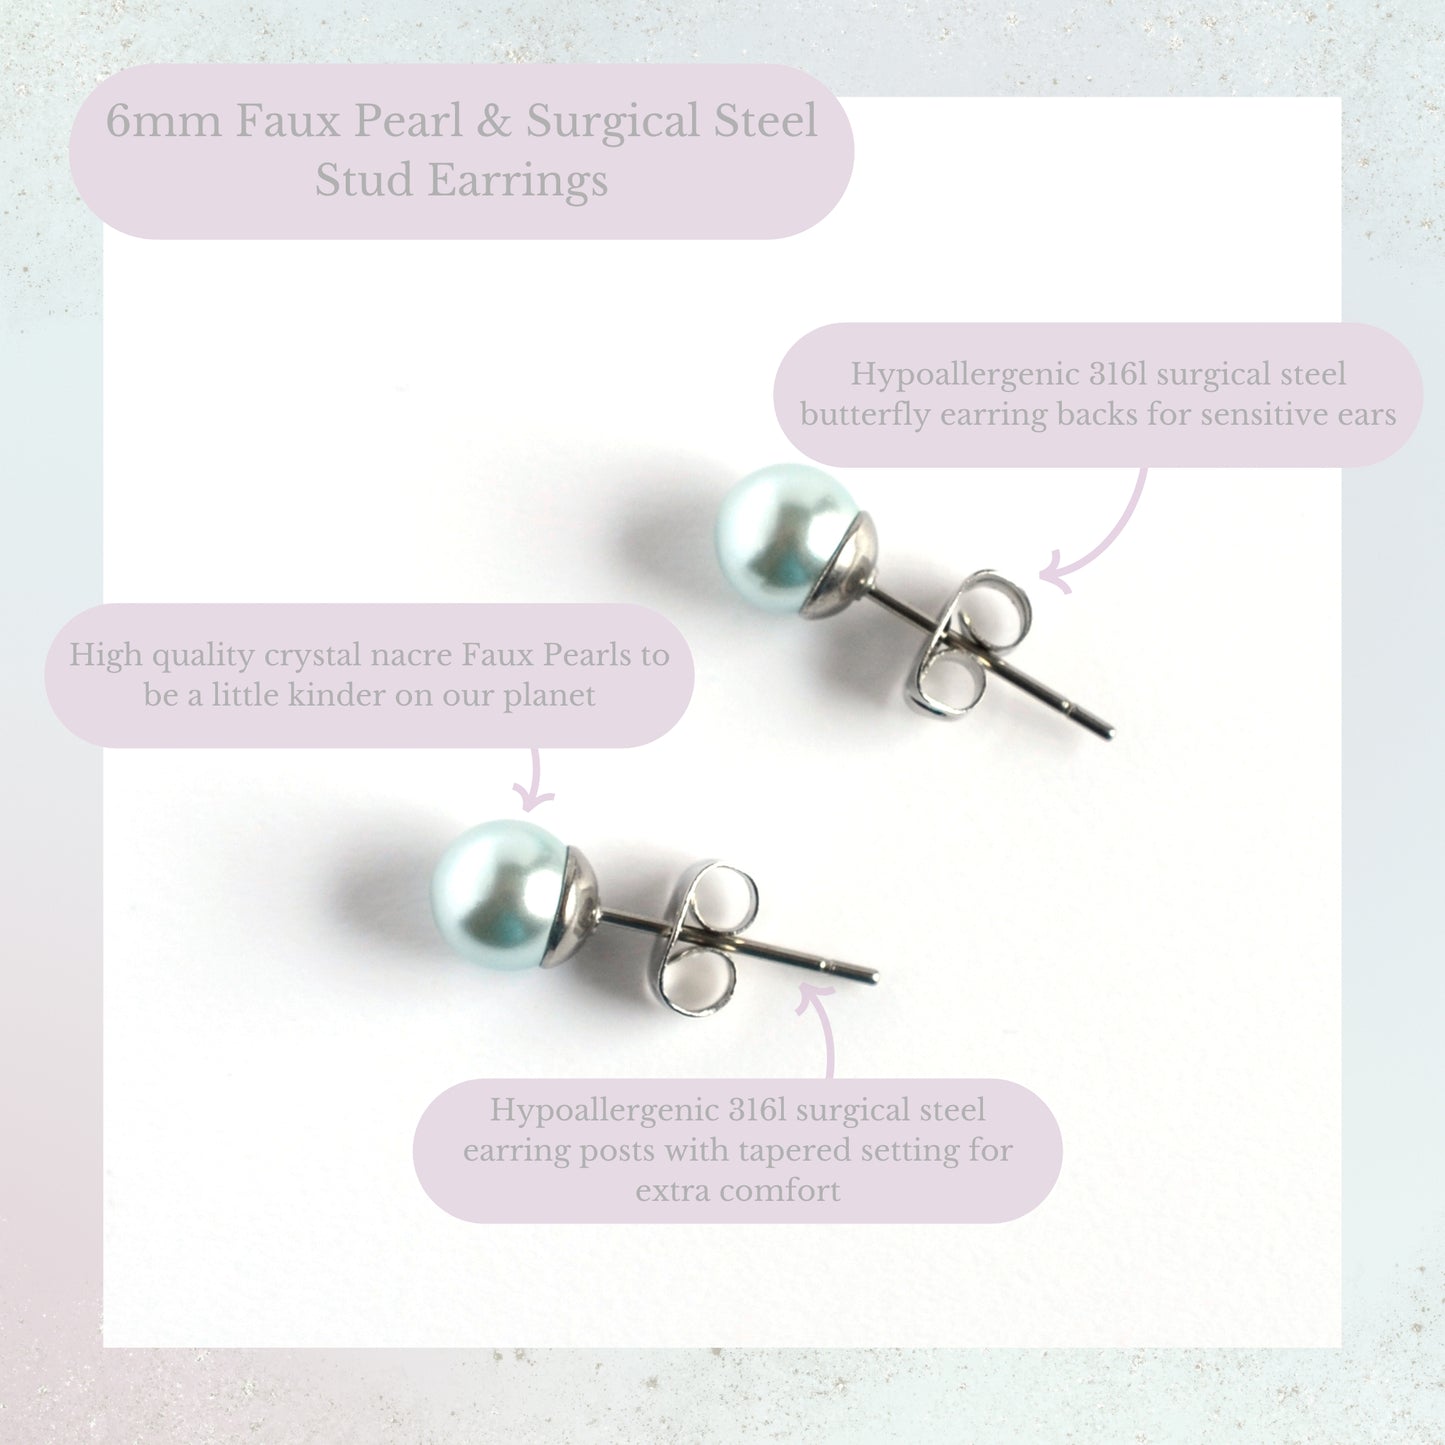 6mm faux pearl and surgical steel stud earrings product information